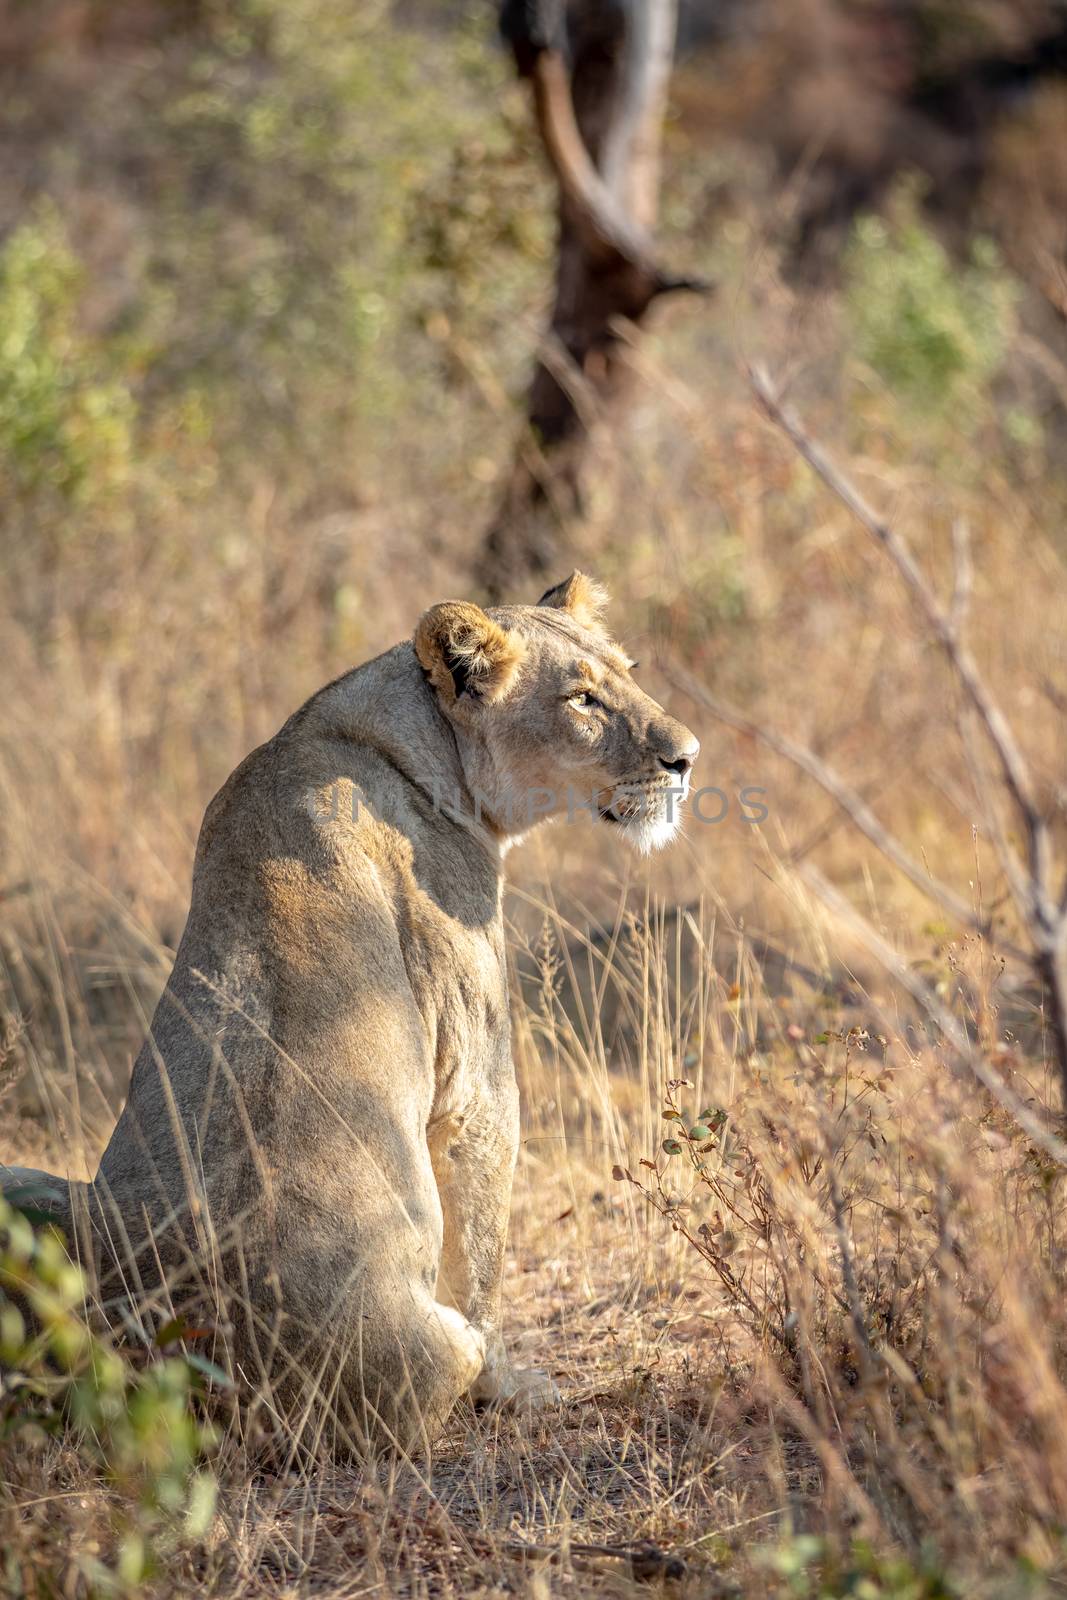 Lioness sitting in the grass and looking in the Welgevonden game reserve, South Africa.